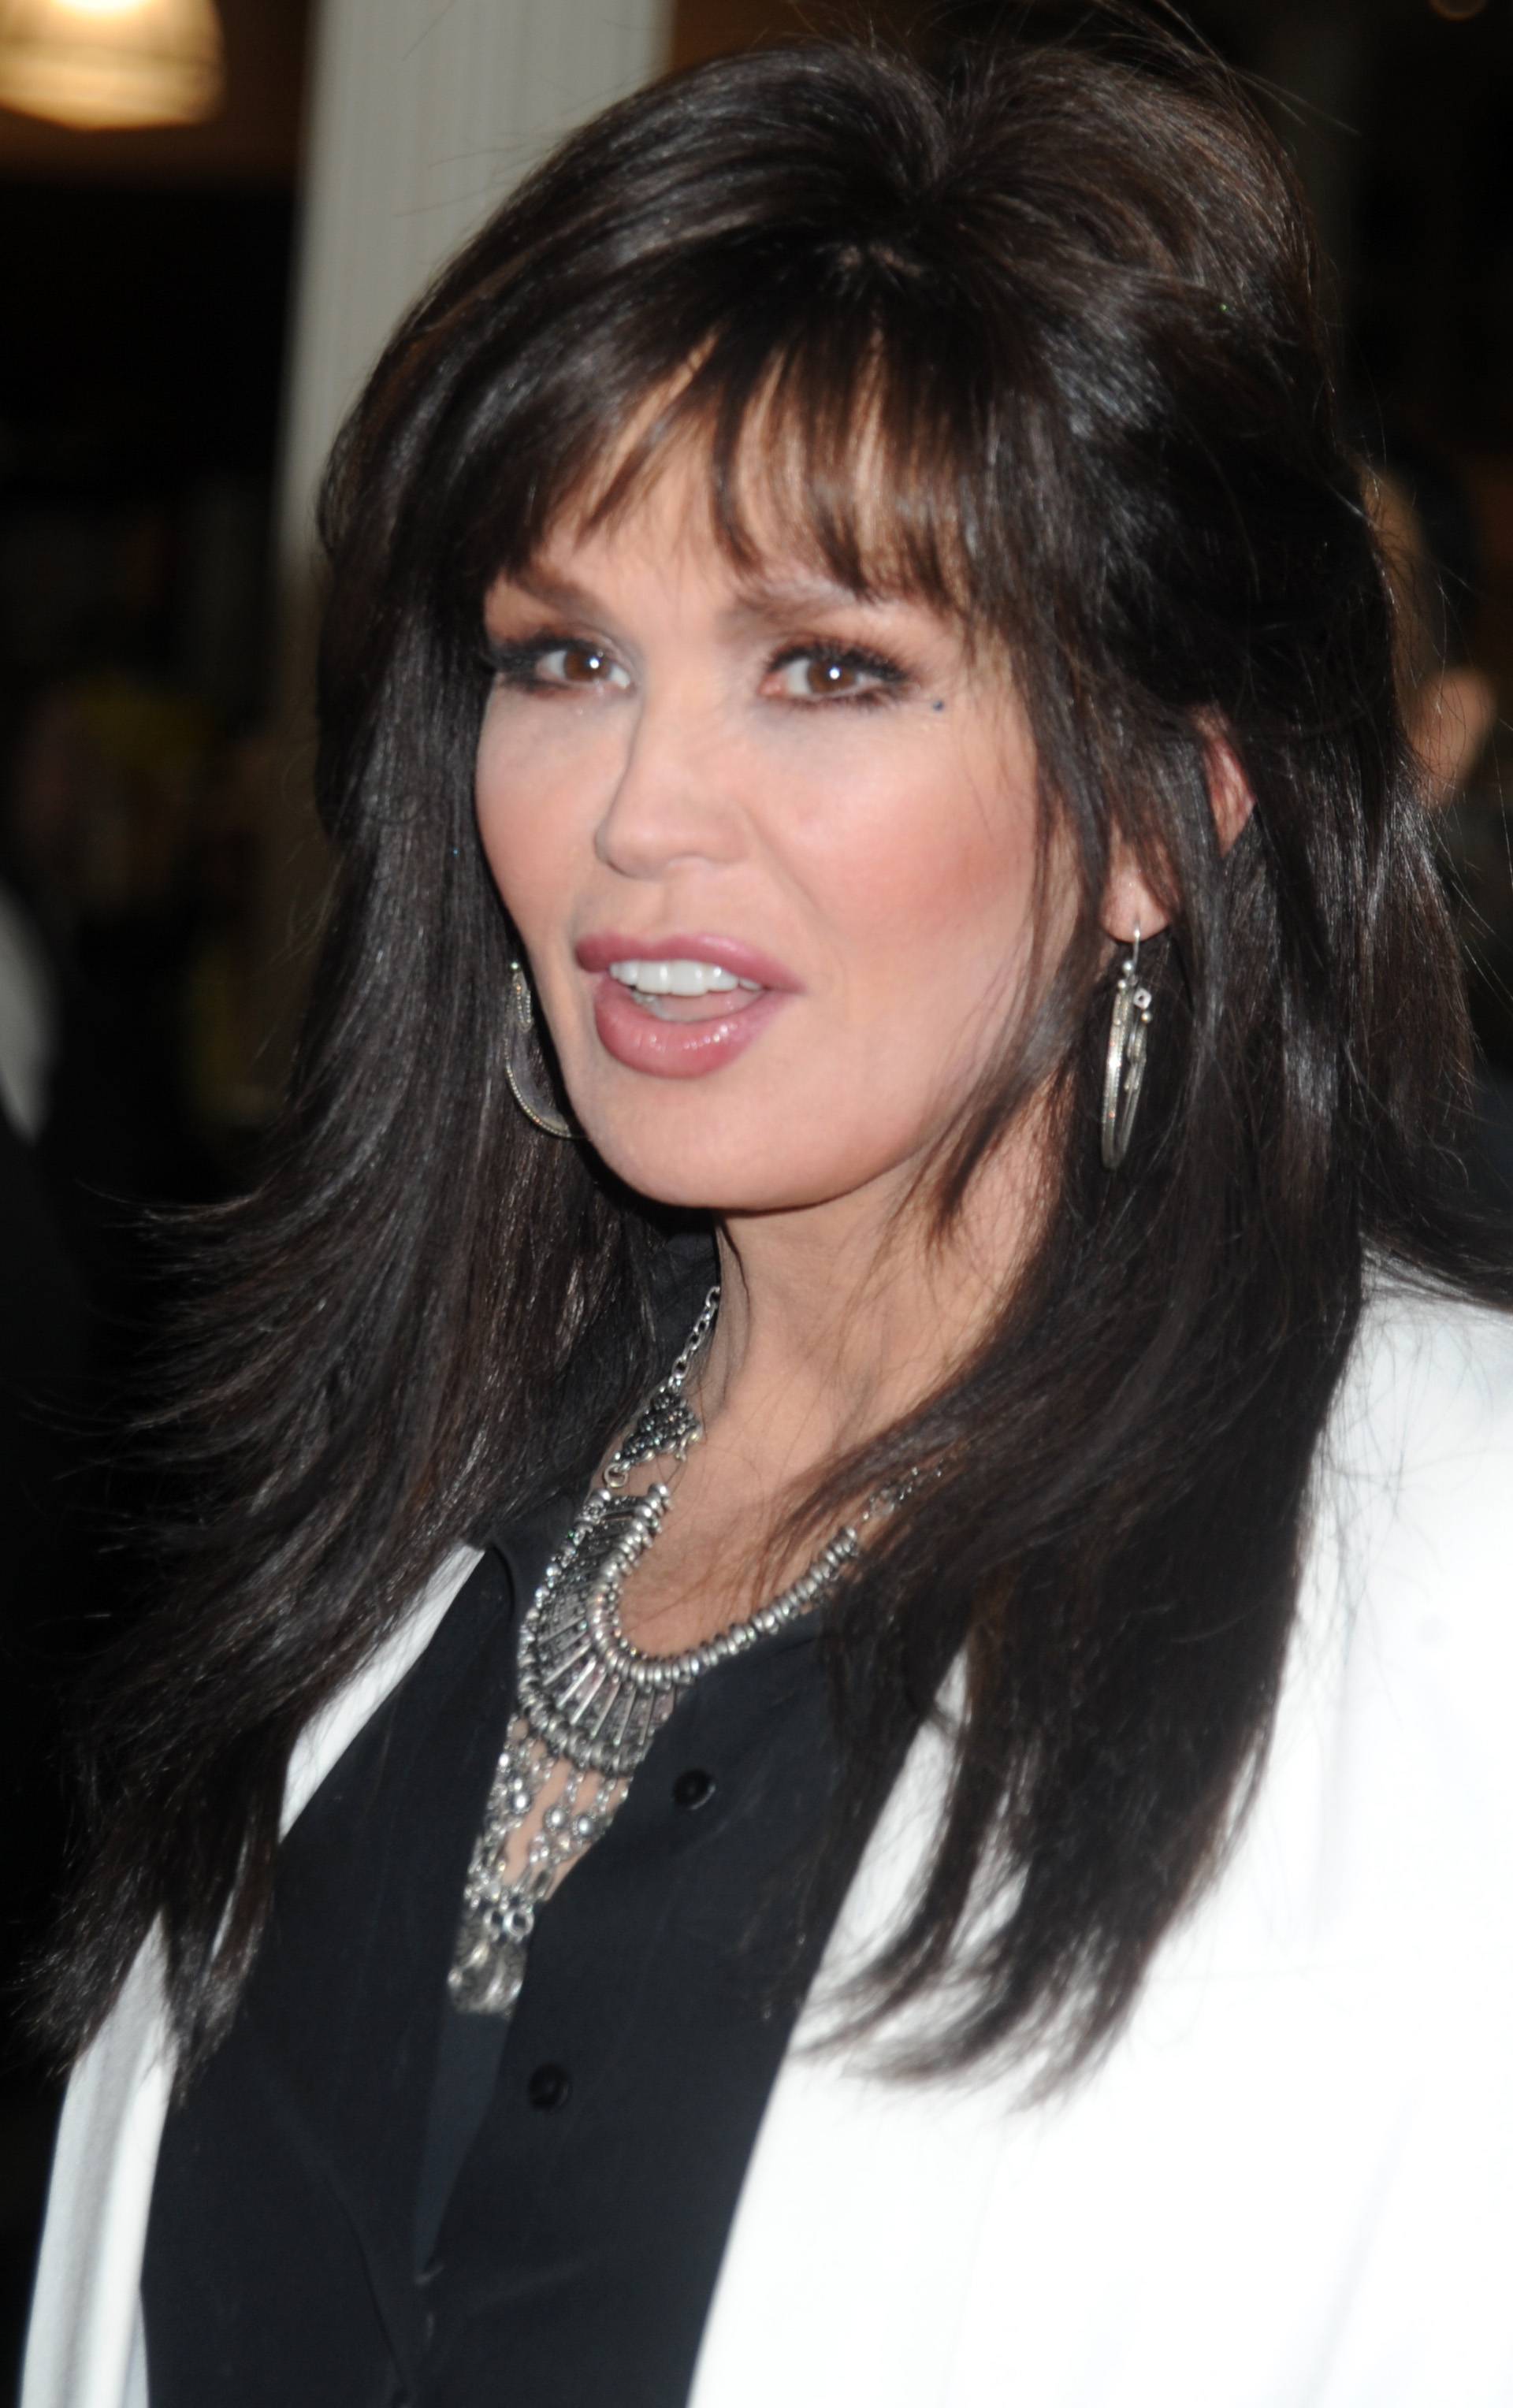 Marie Osmond CD Signing - NYC